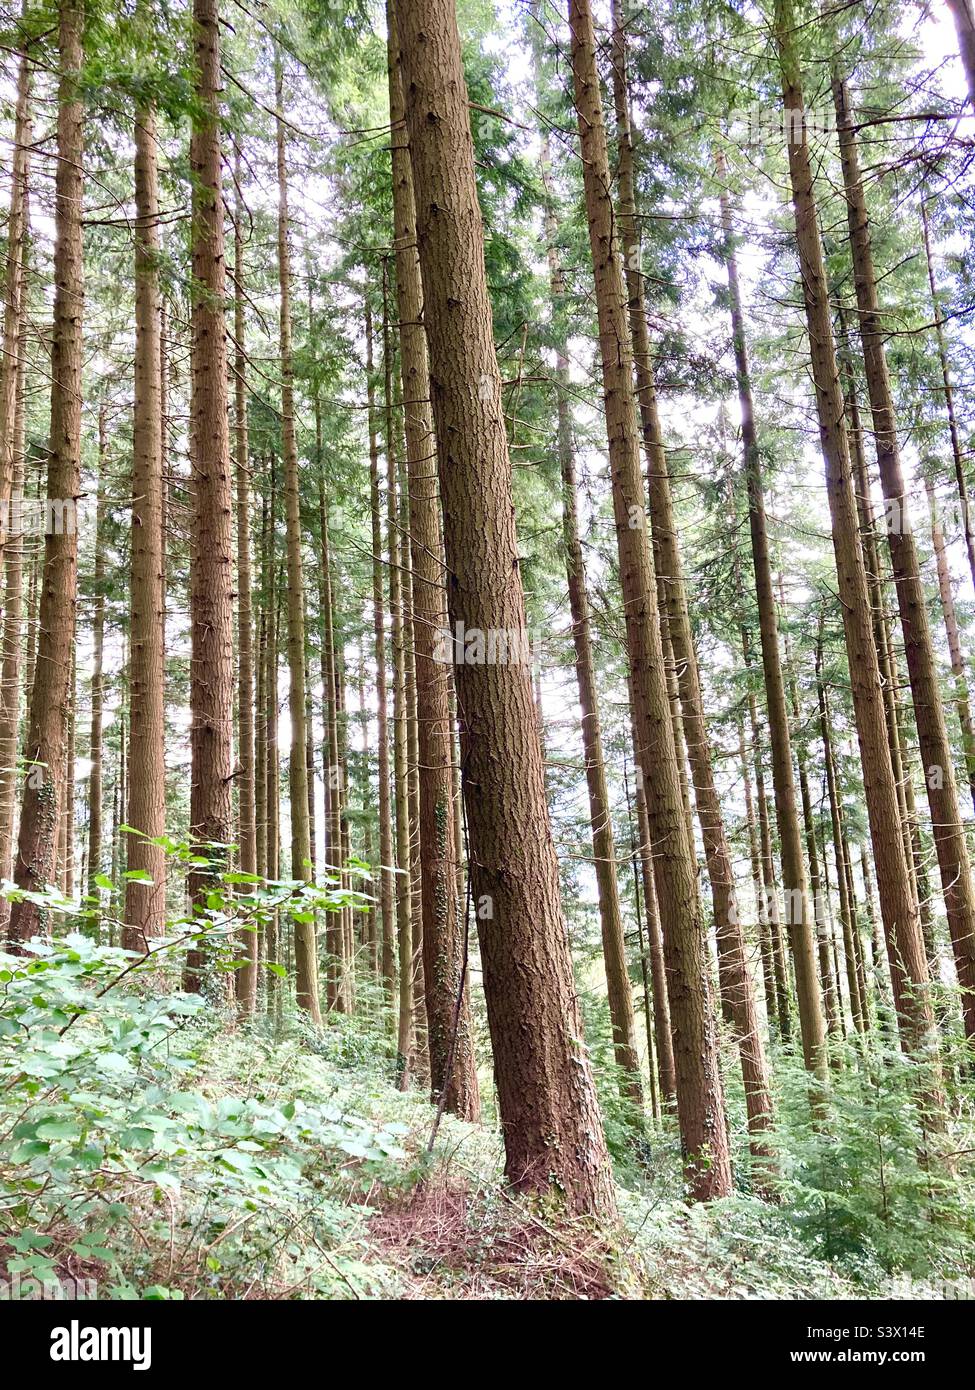 Tall trees growing in a forest Stock Photo